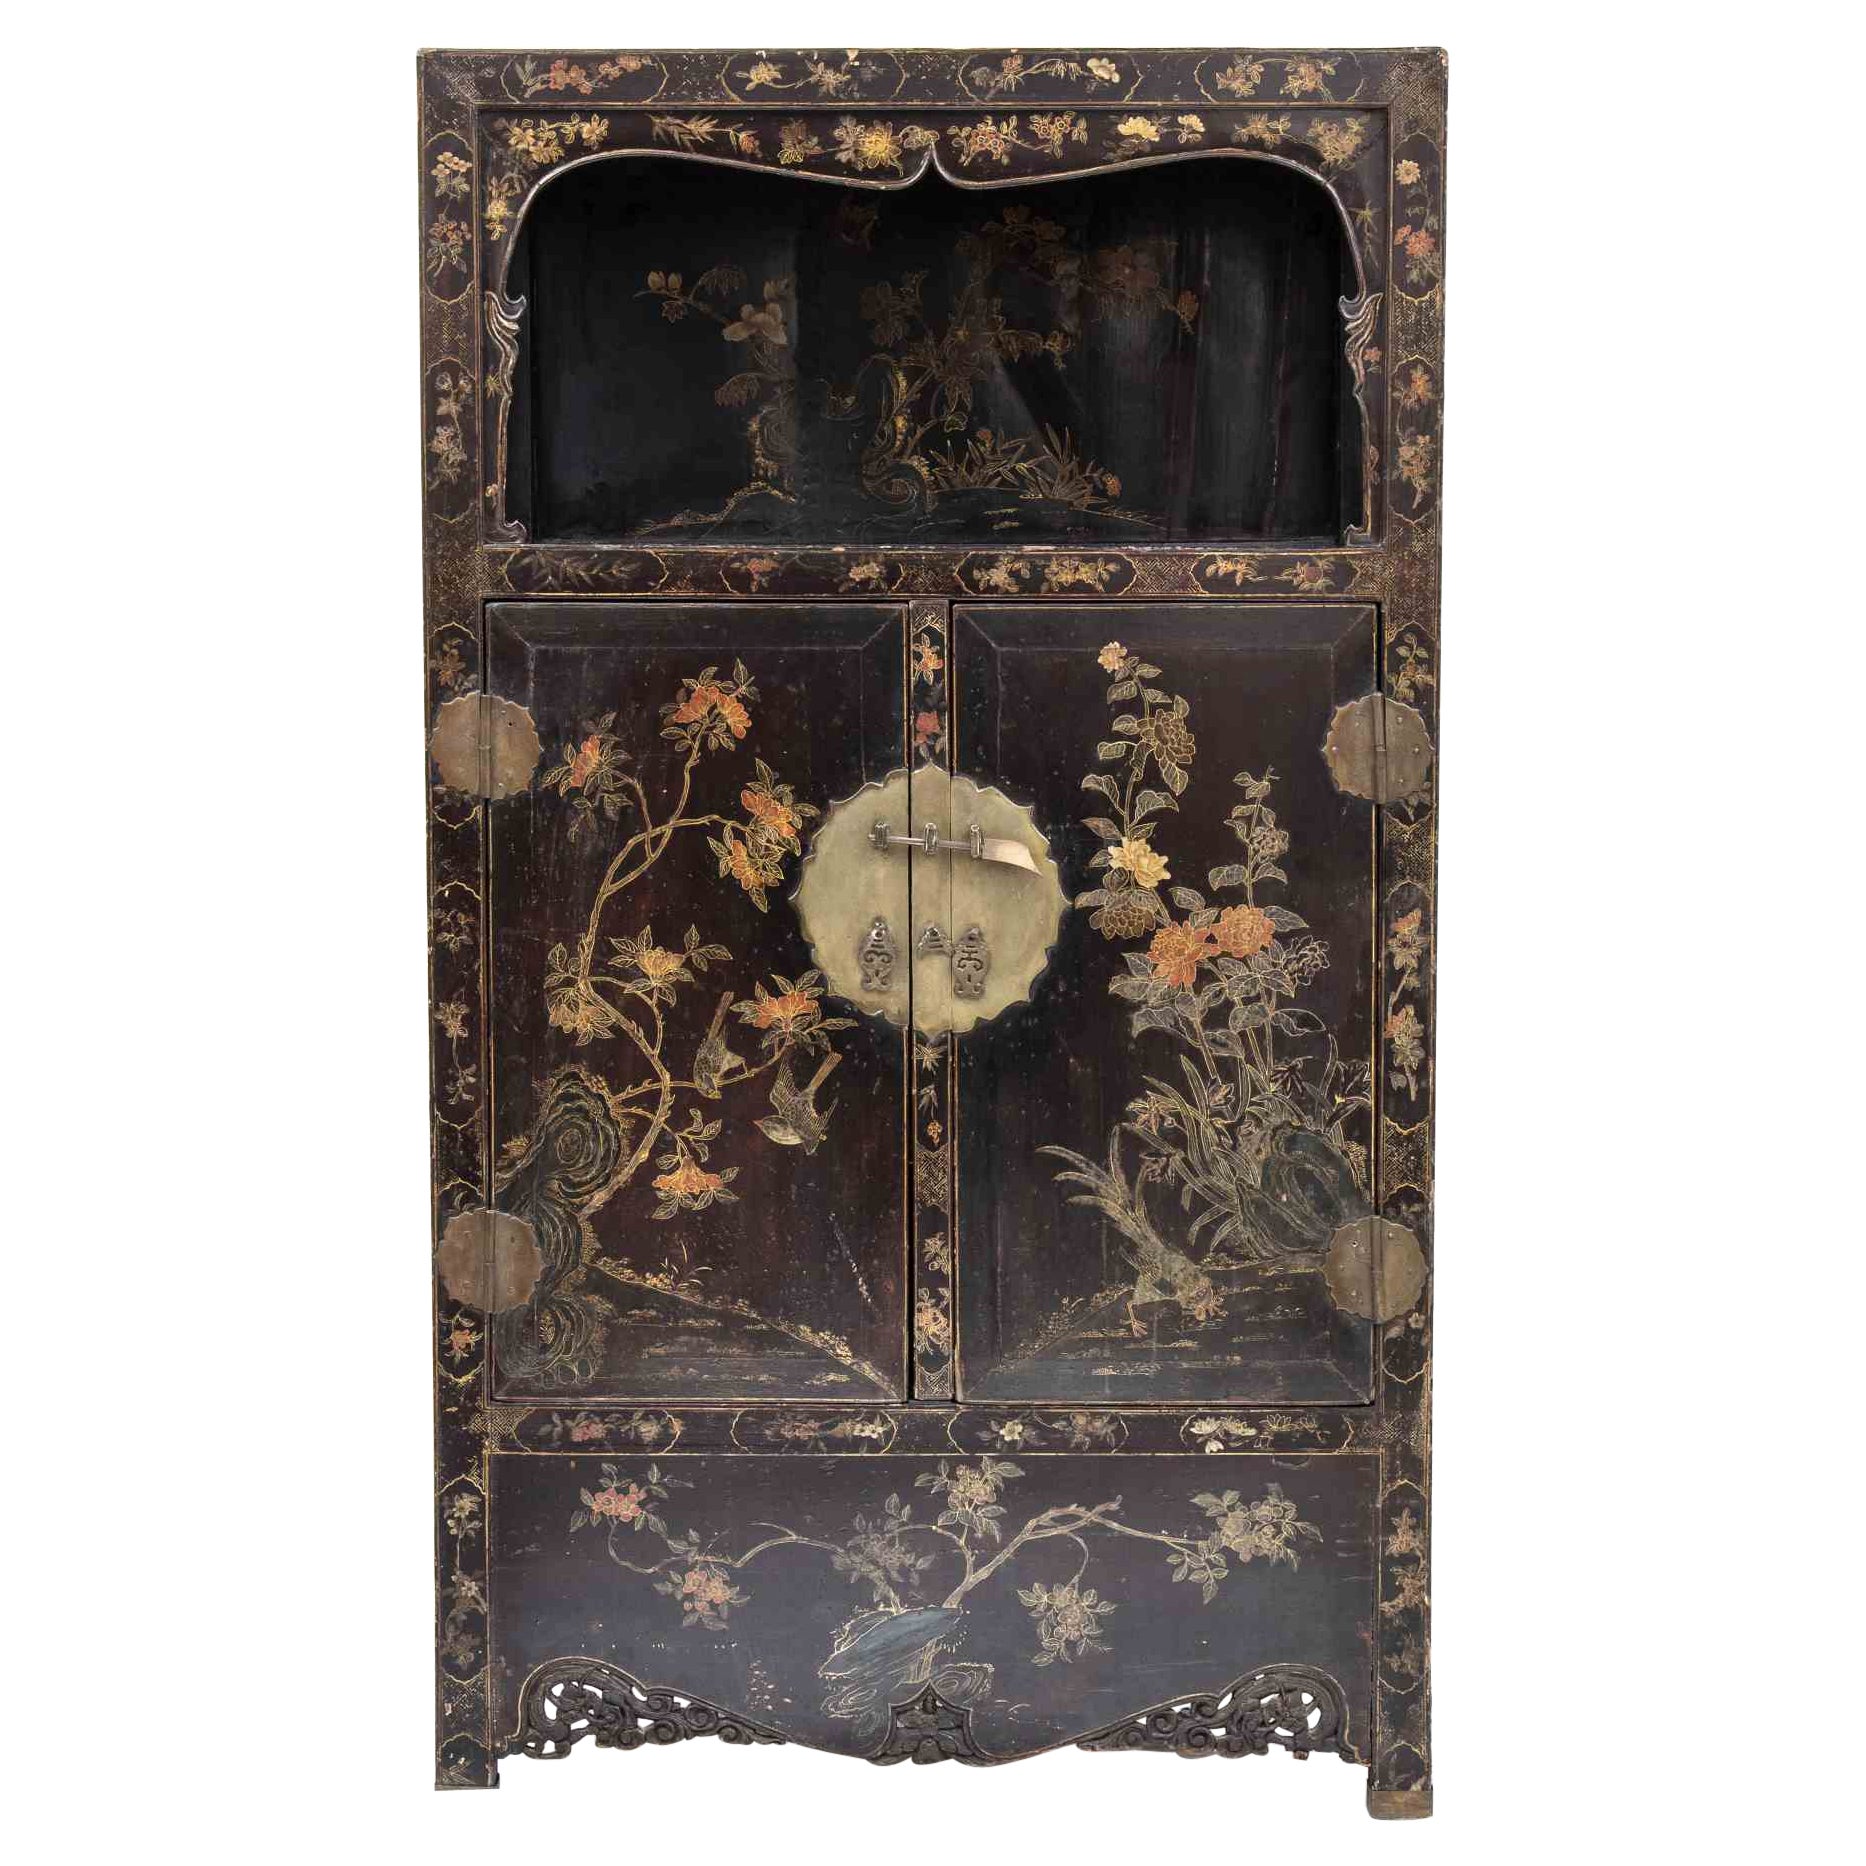 Vintage Lacquered and Painted Wooden Cabinet, China, Early 20th Century